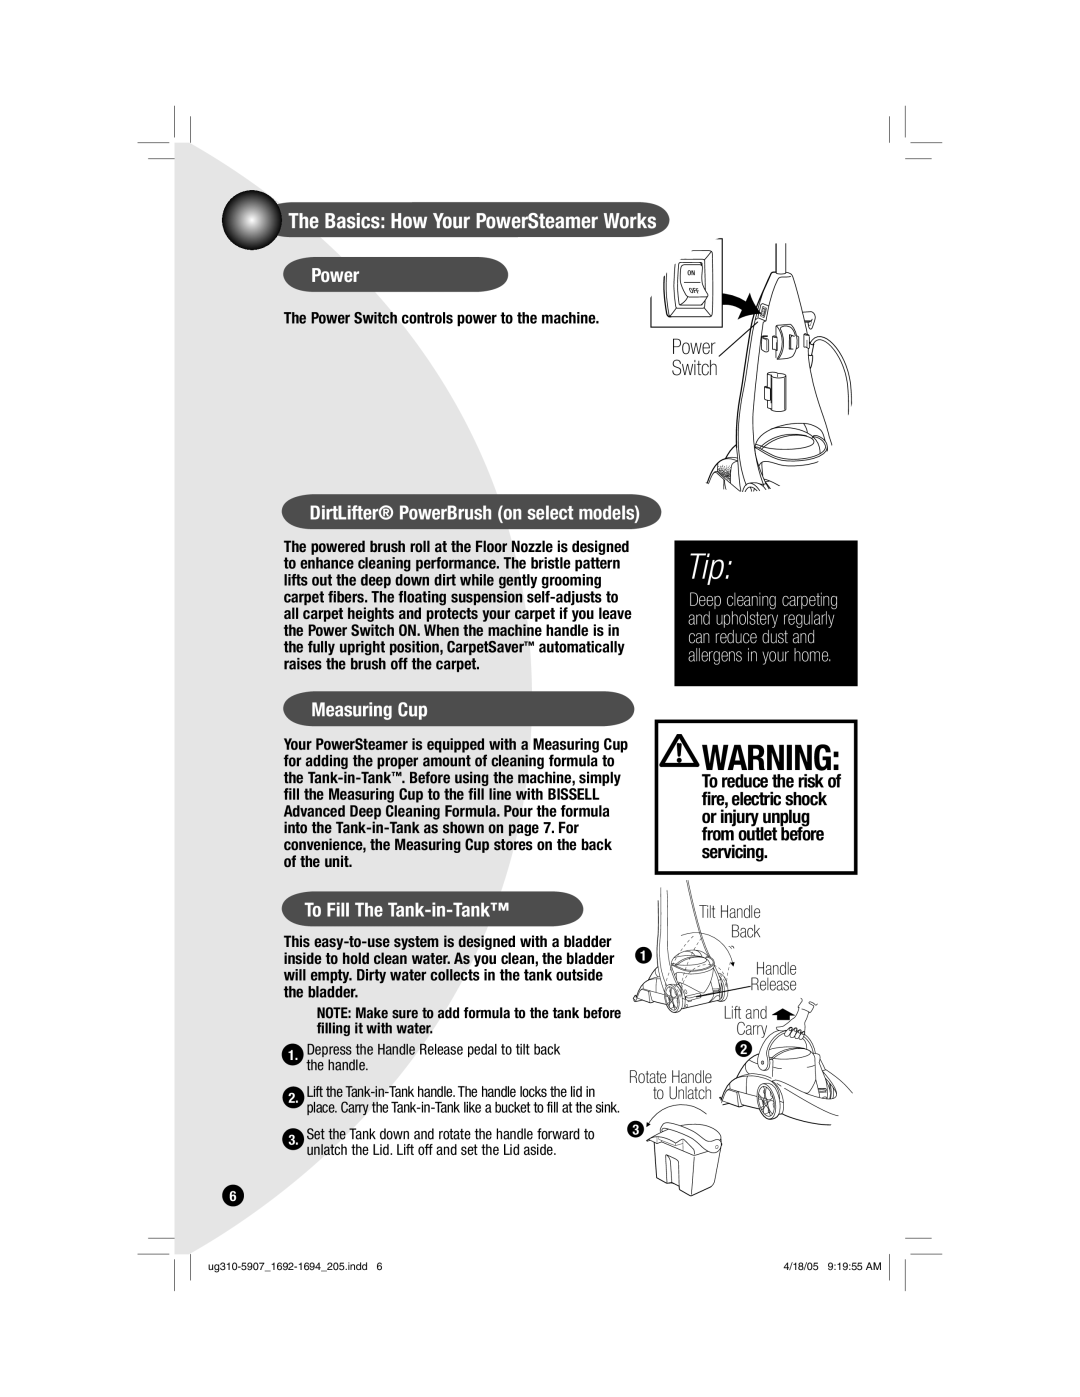 Bissell 1693, 8806, 8805, 1692 warranty The Basics How Your PowerSteamer Works, Measuring Cup, To Fill The Tank-in-Tank 